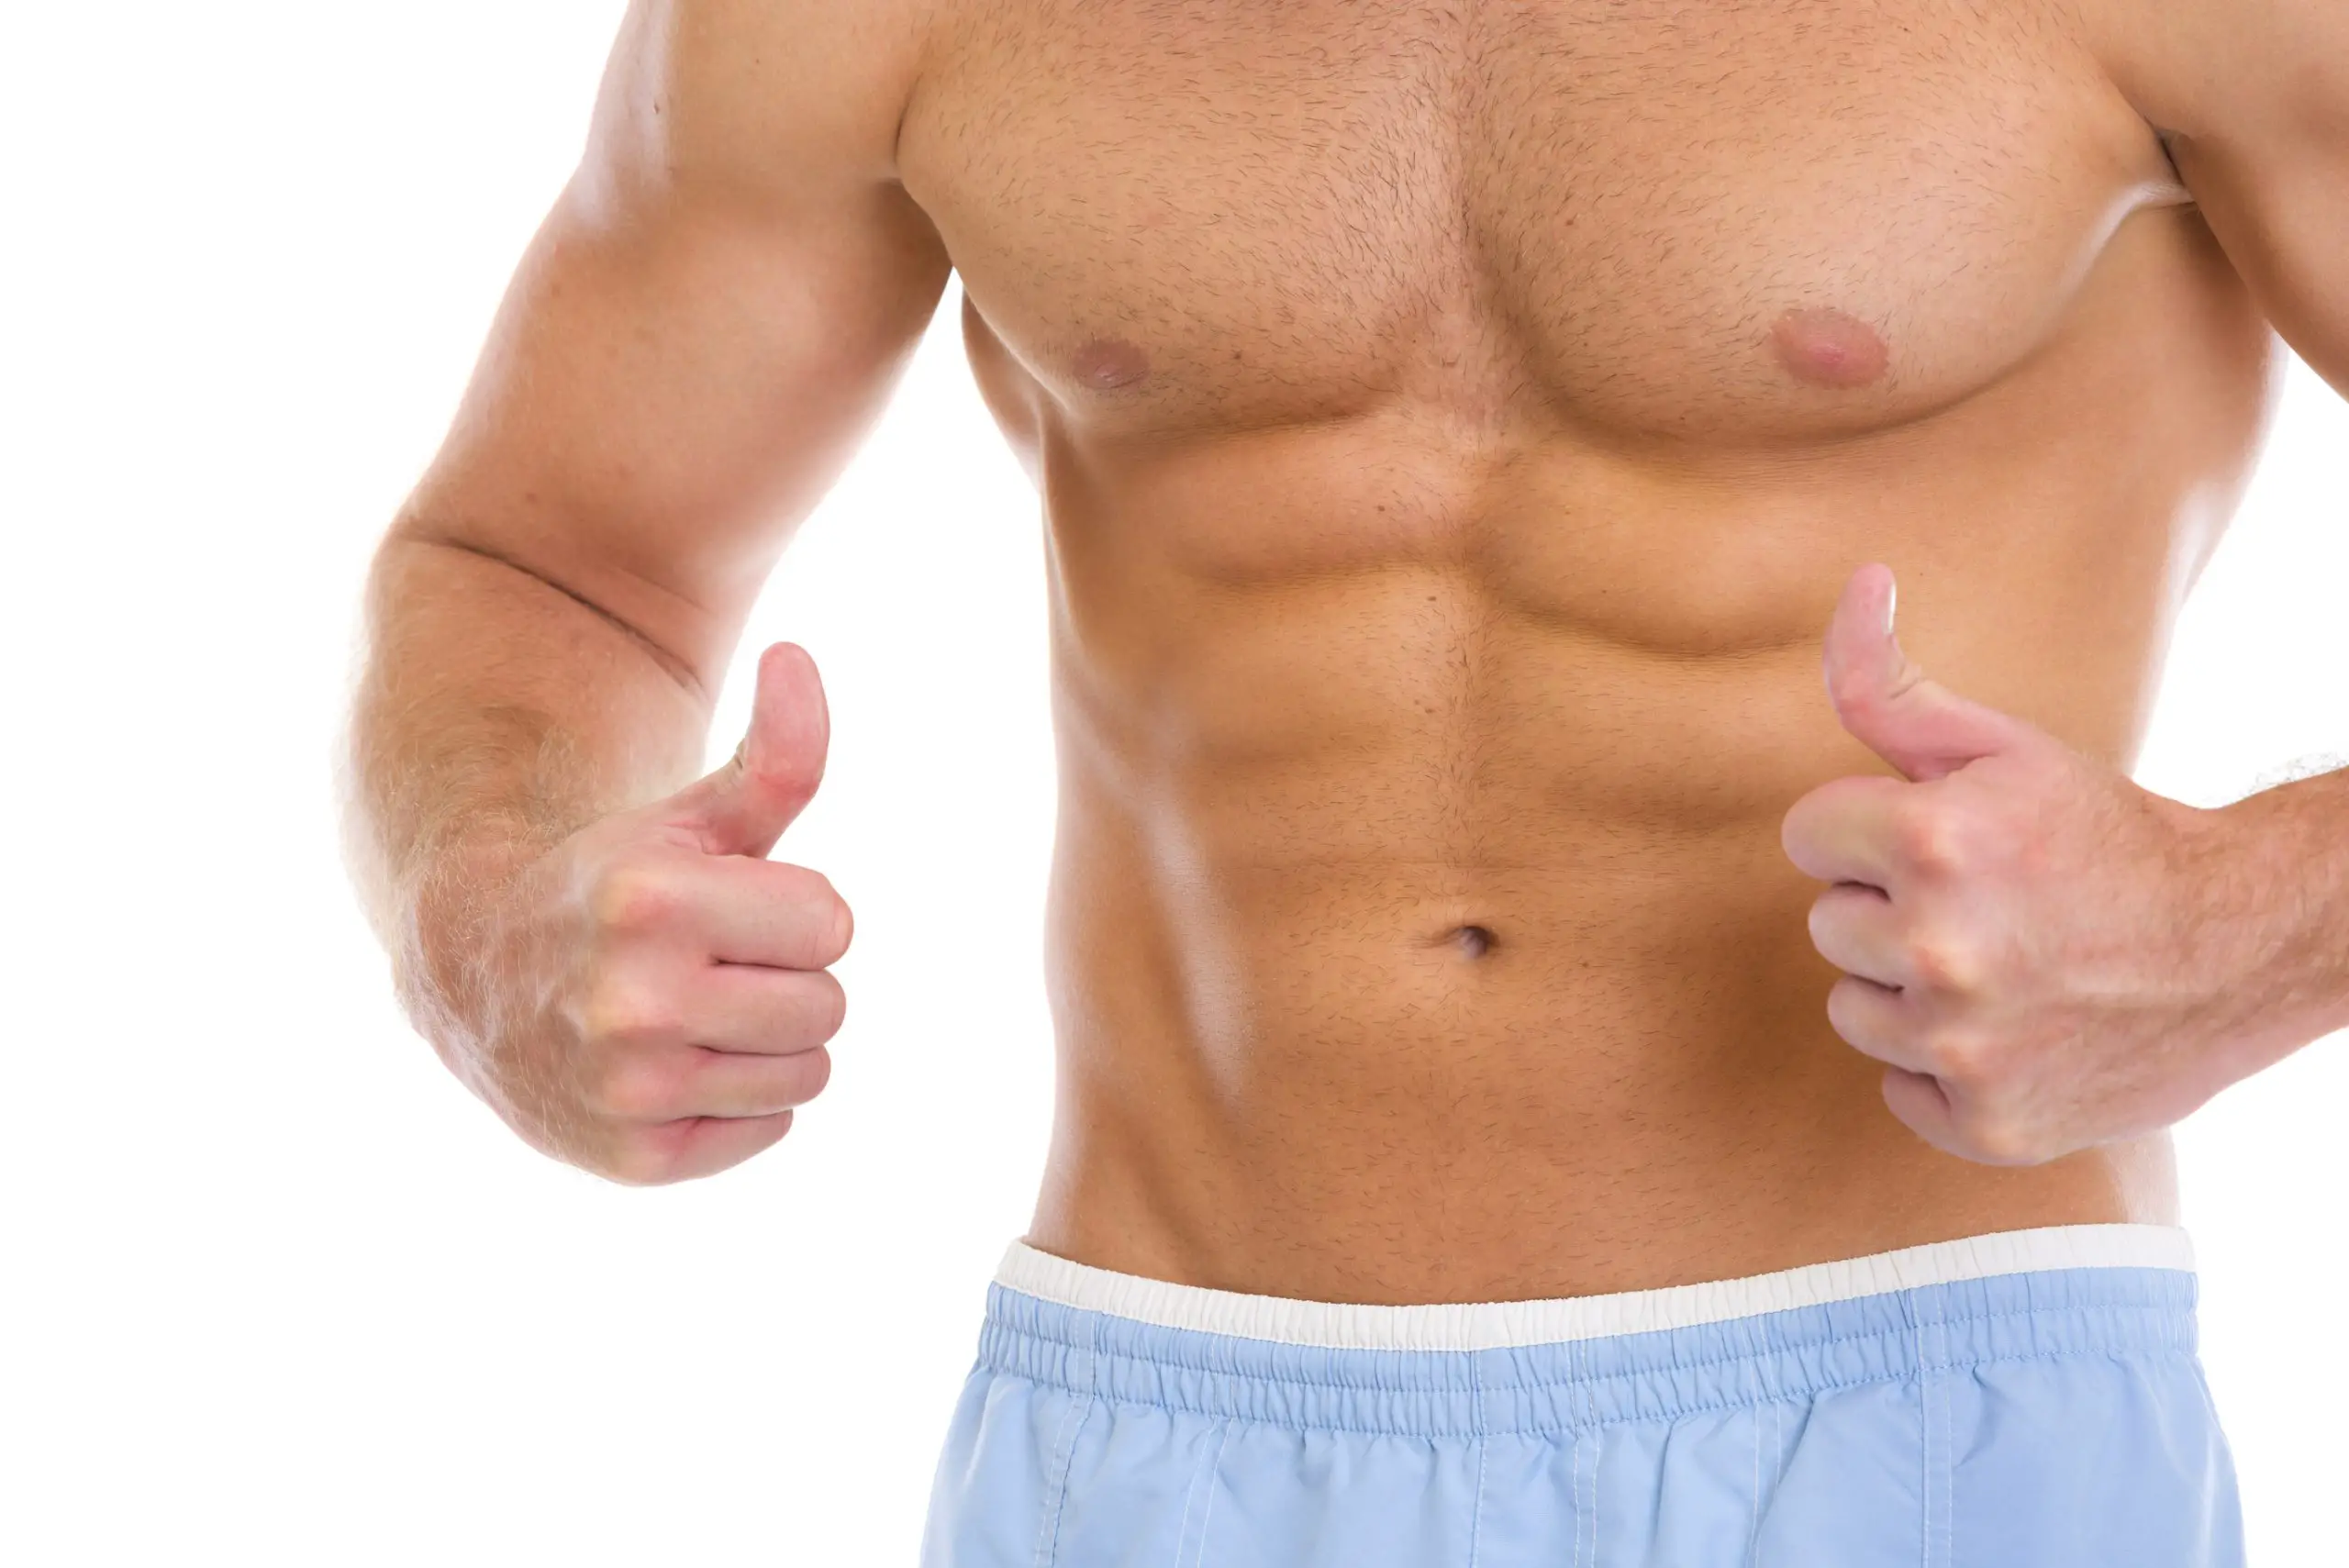 Techniques and Methods: How to Get a Visible Six Pack